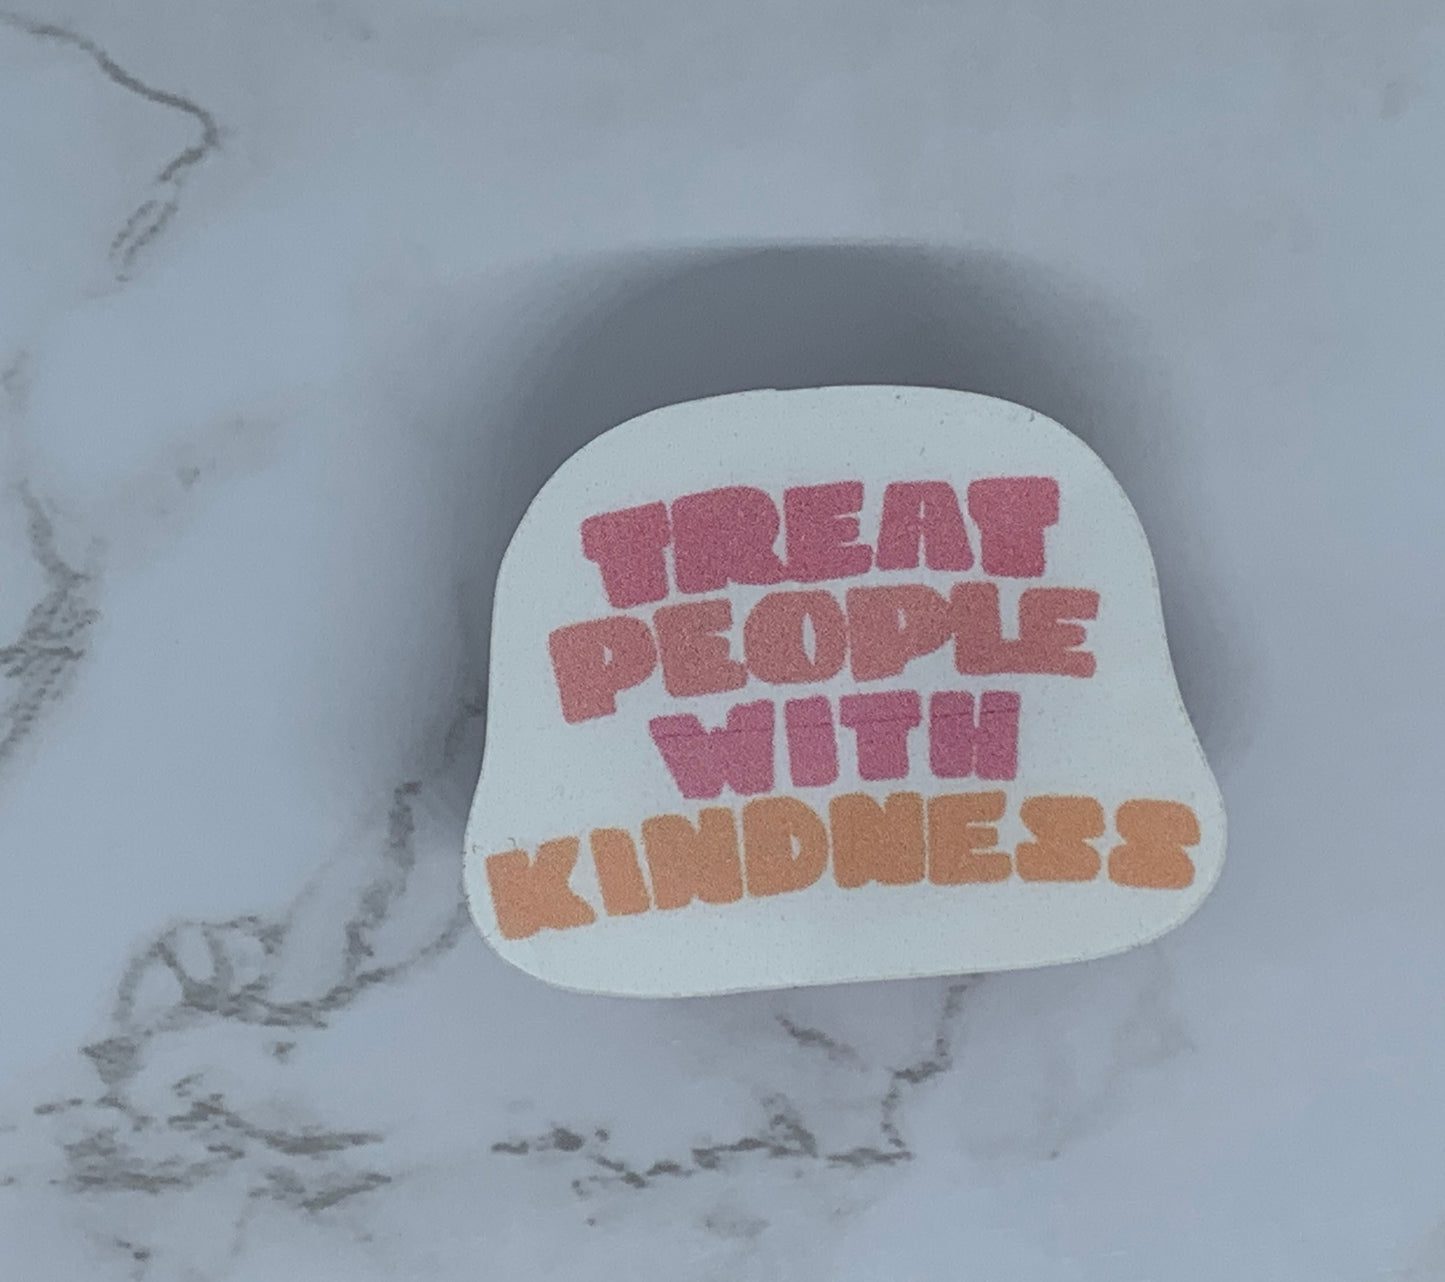 Treat People with Kindness sticker